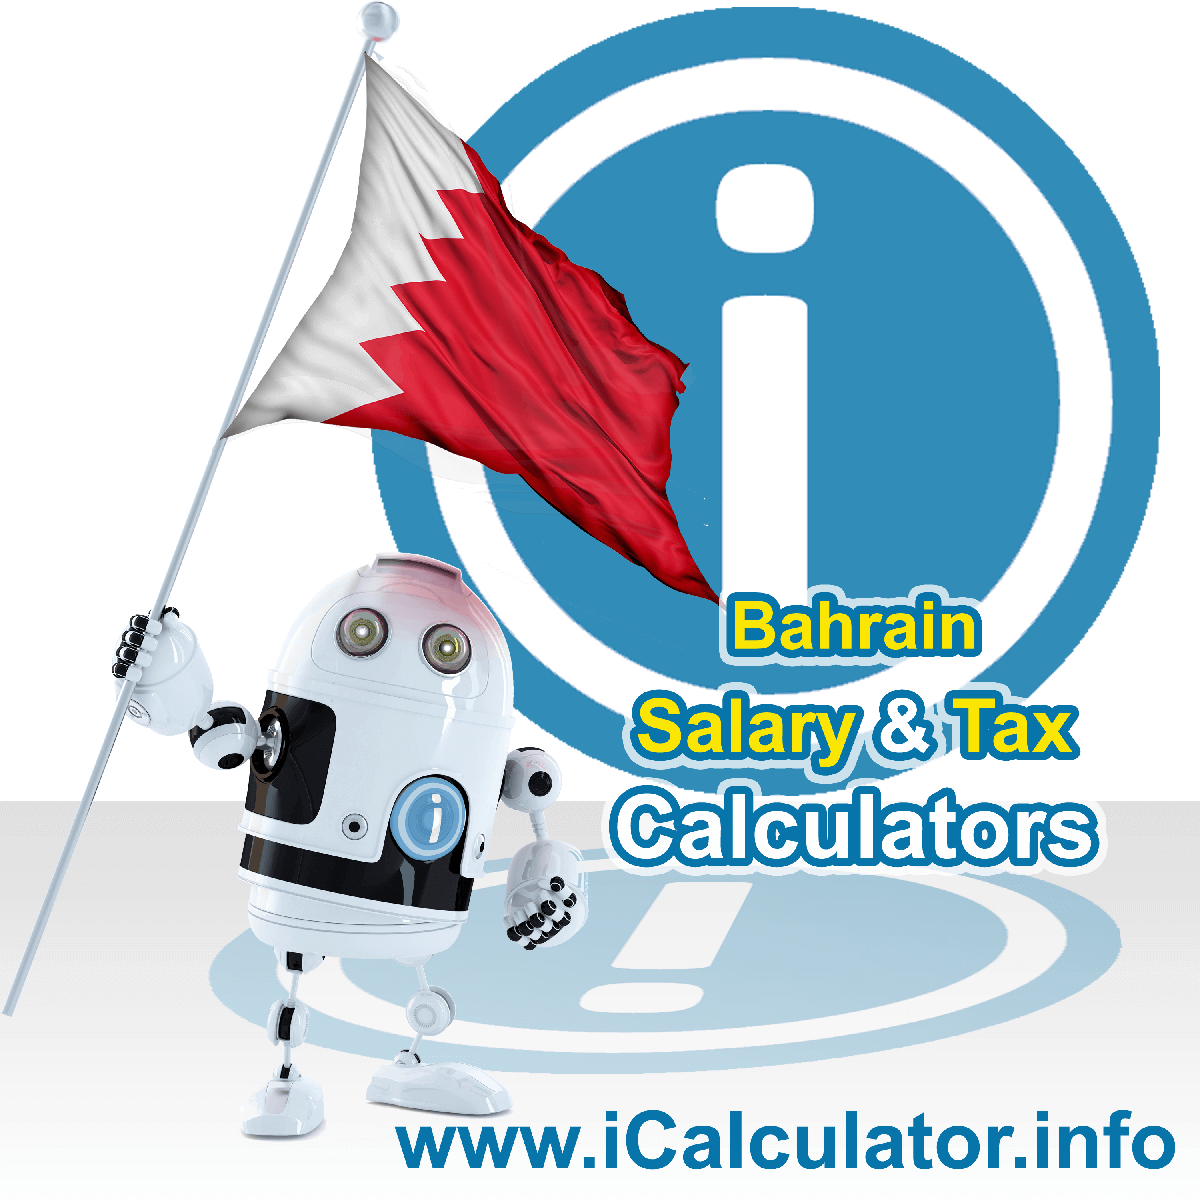 Bahrain Tax Calculator. This image shows the Bahrain flag and information relating to the tax formula for the Bahrain Salary Calculator